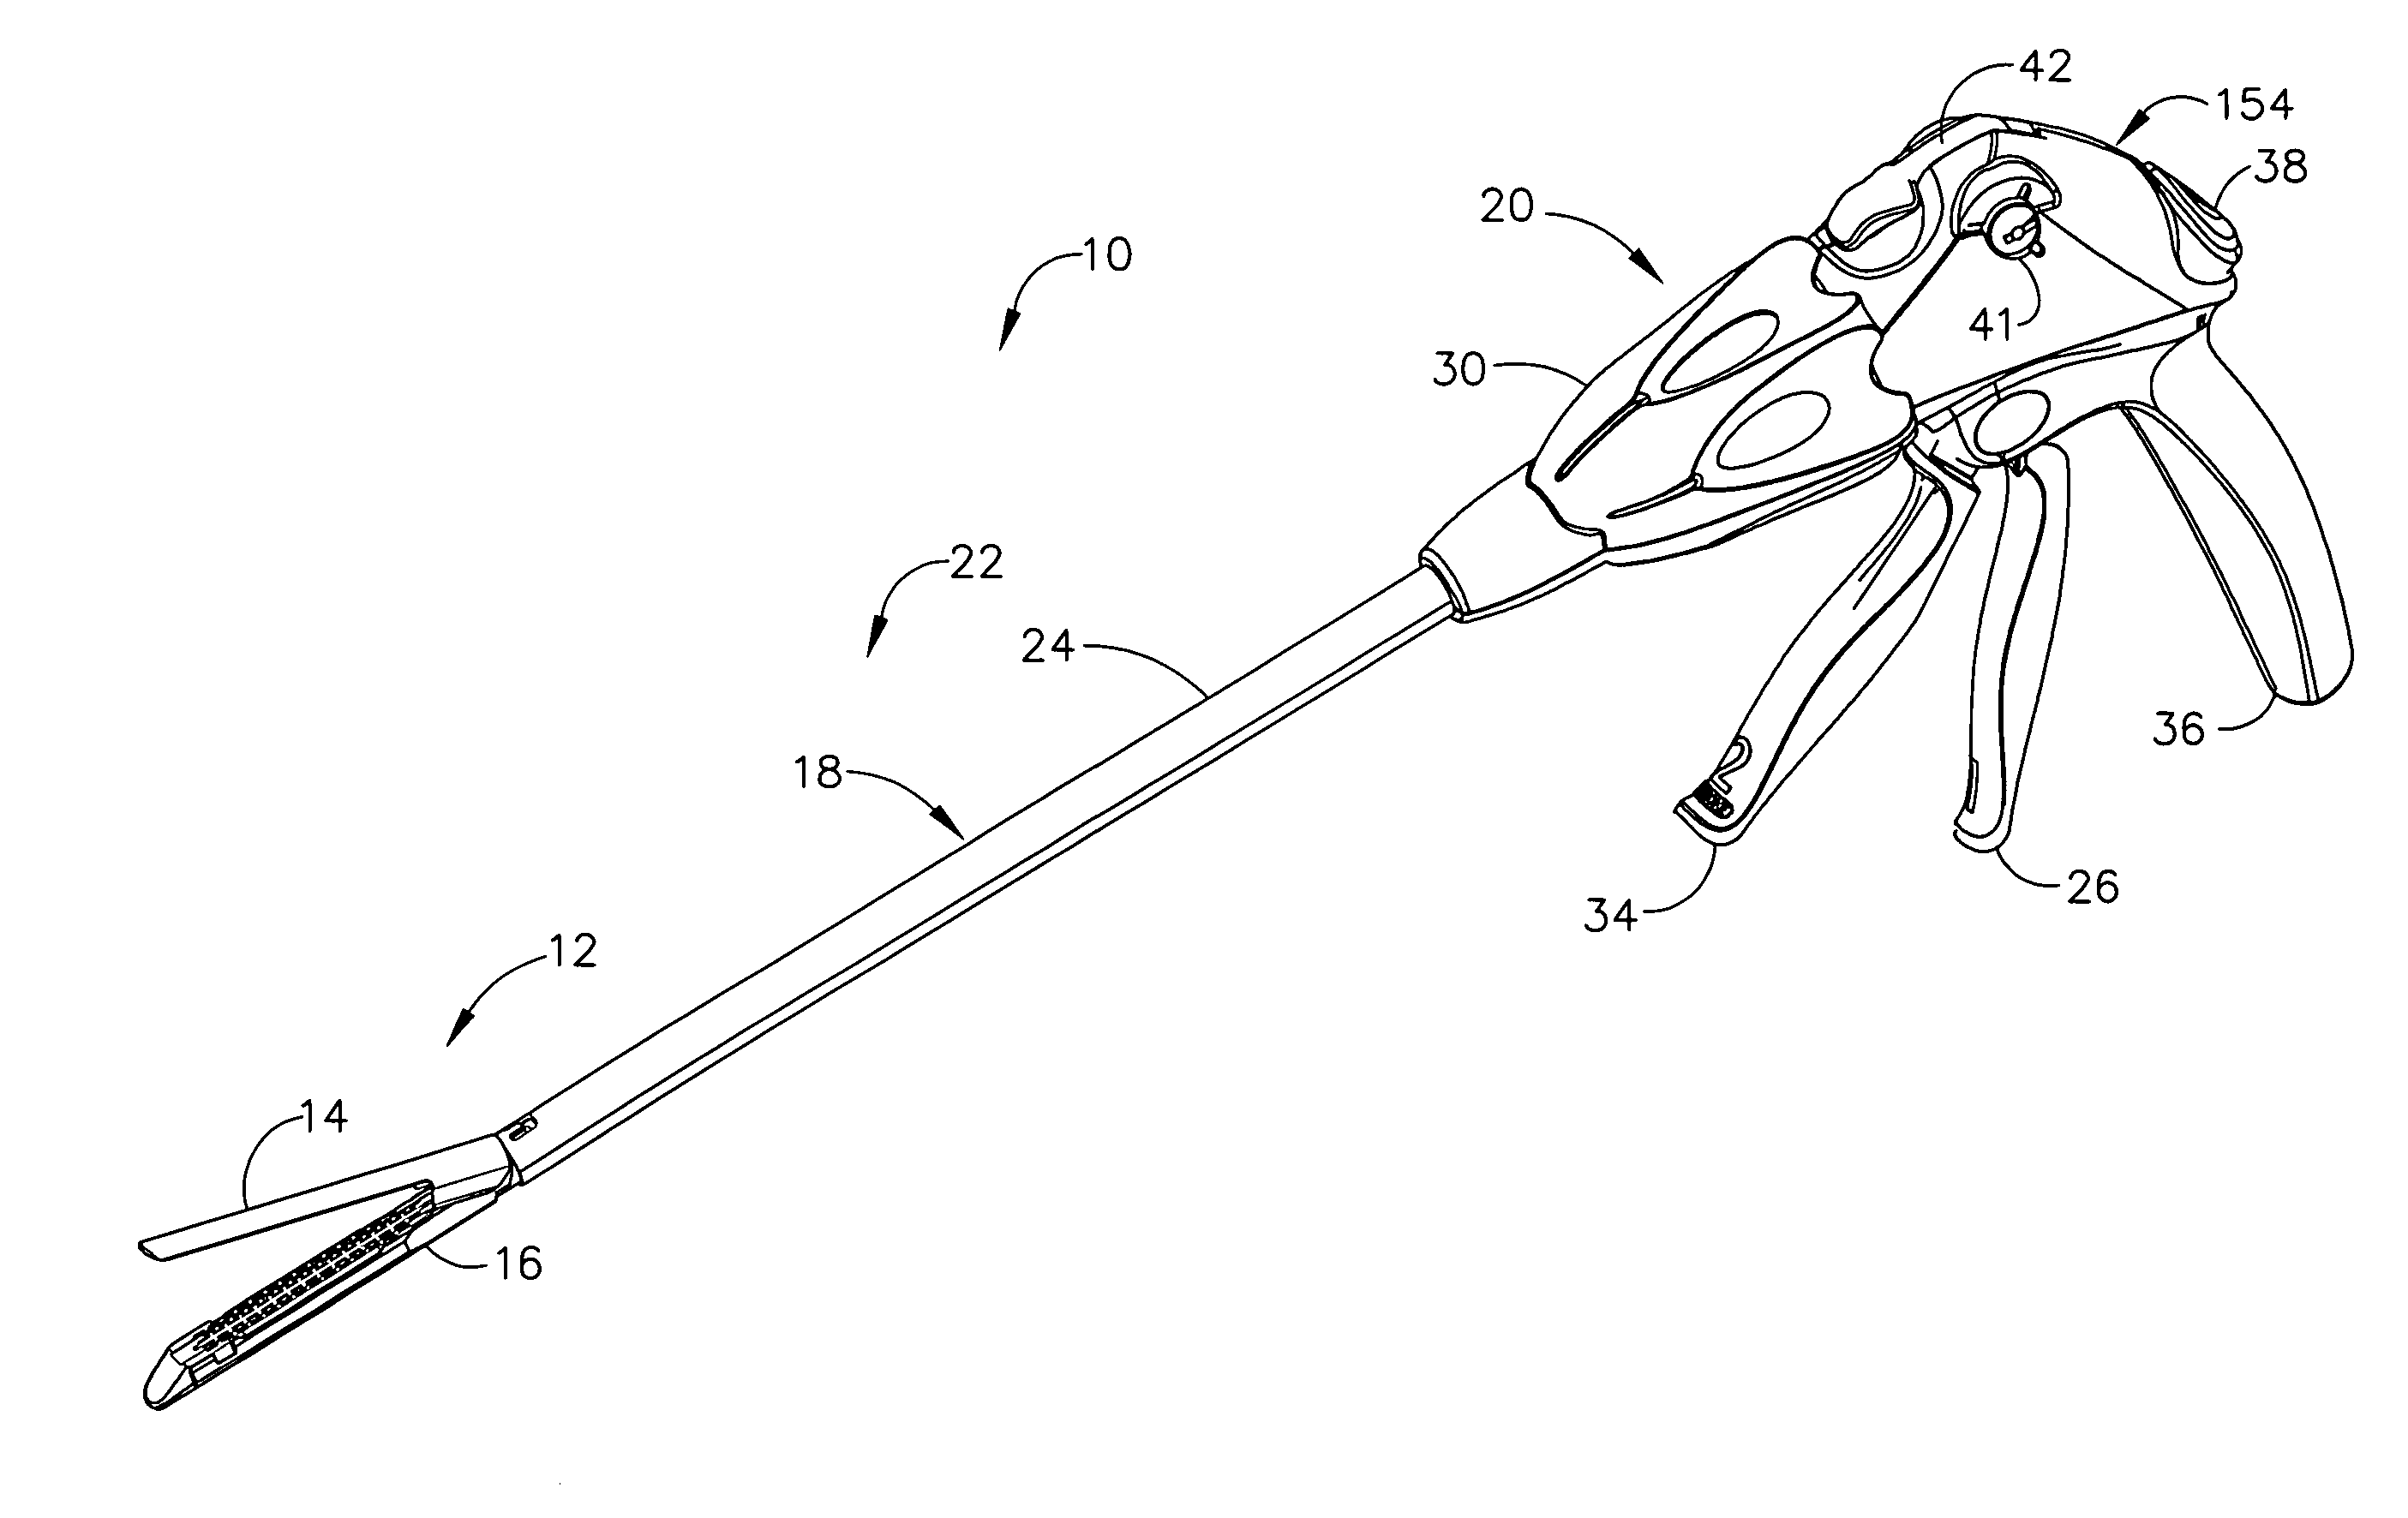 Surgical instrument incorporating EAP blocking lockout mechanism